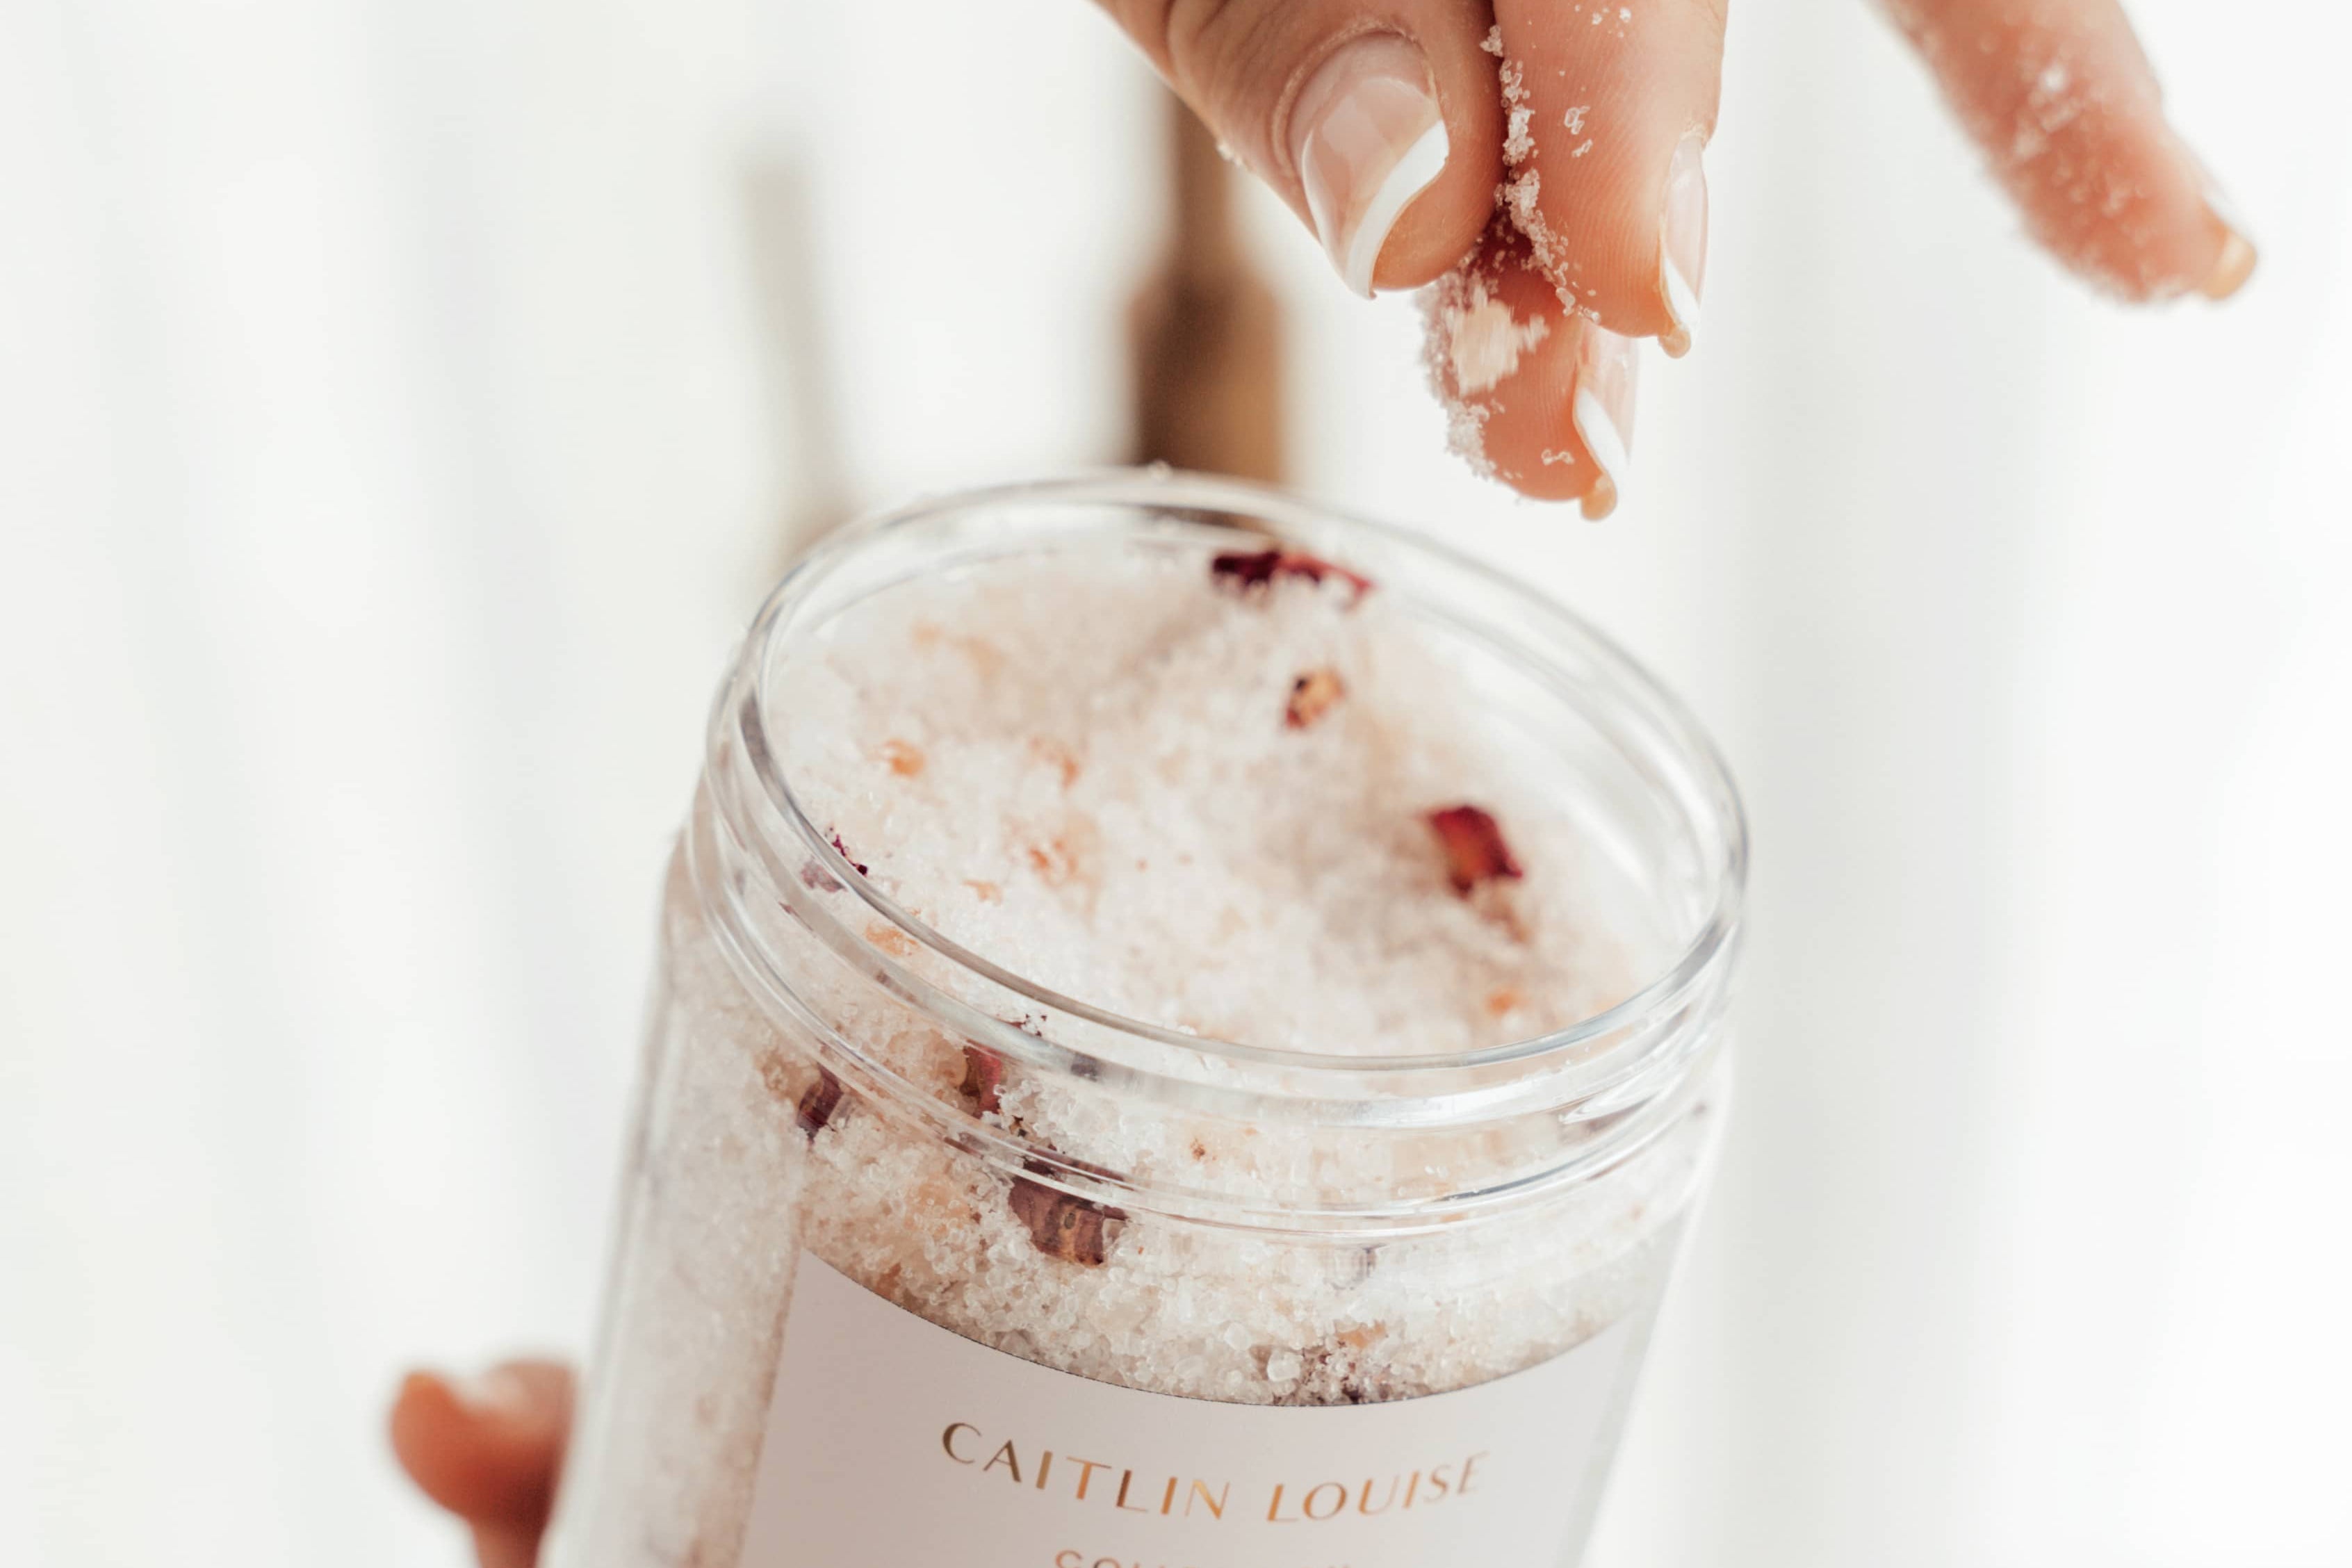 Hand reaching into Caitlin Louise Collection's Me Time Luxury Bath Salts showing the salts and rose petals inside.